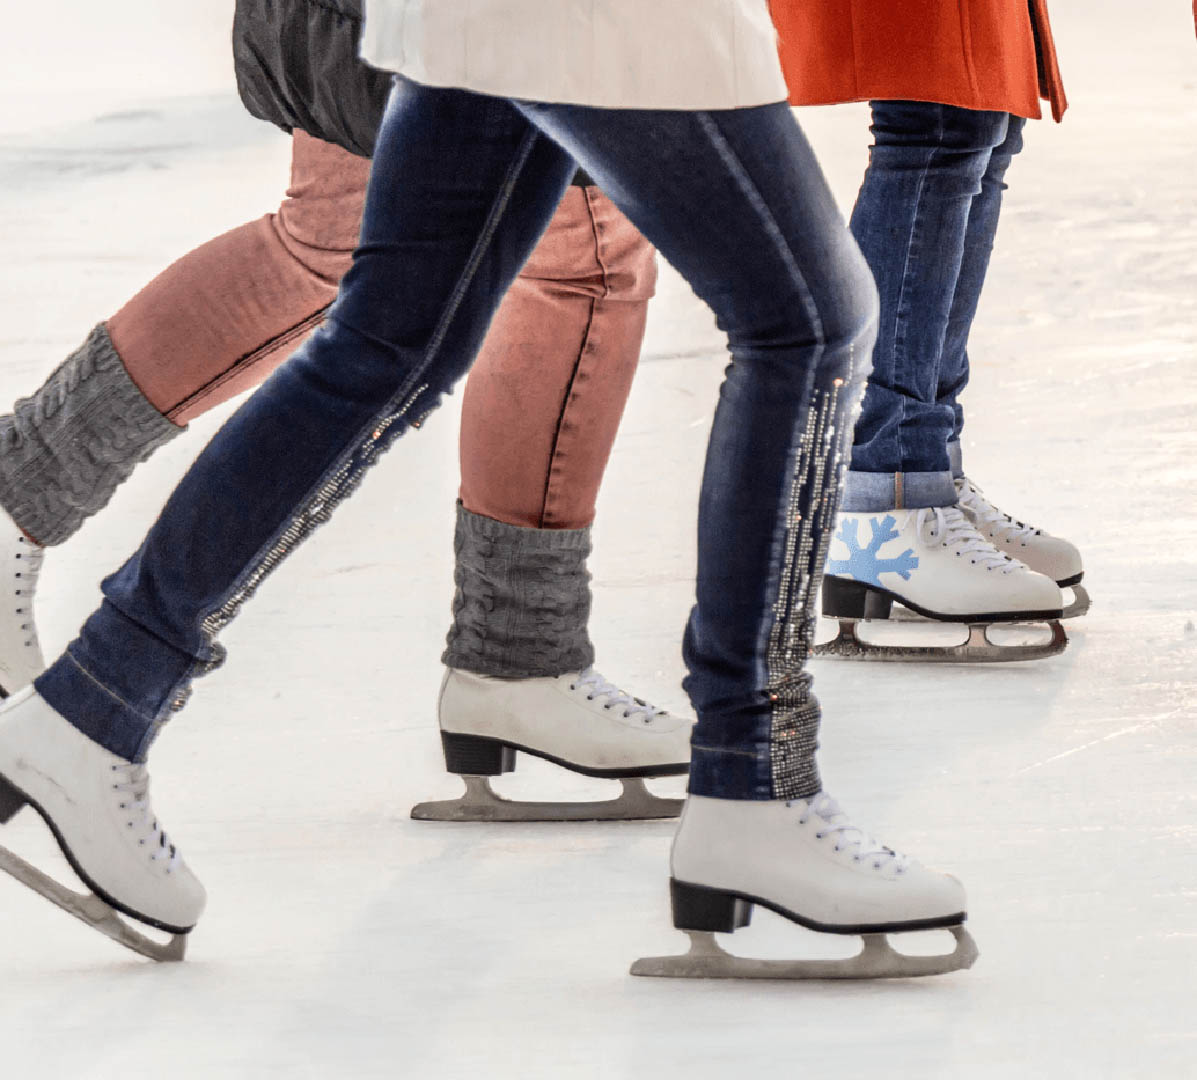 Things to Do During Winter in Winnipeg Winter Skating Image